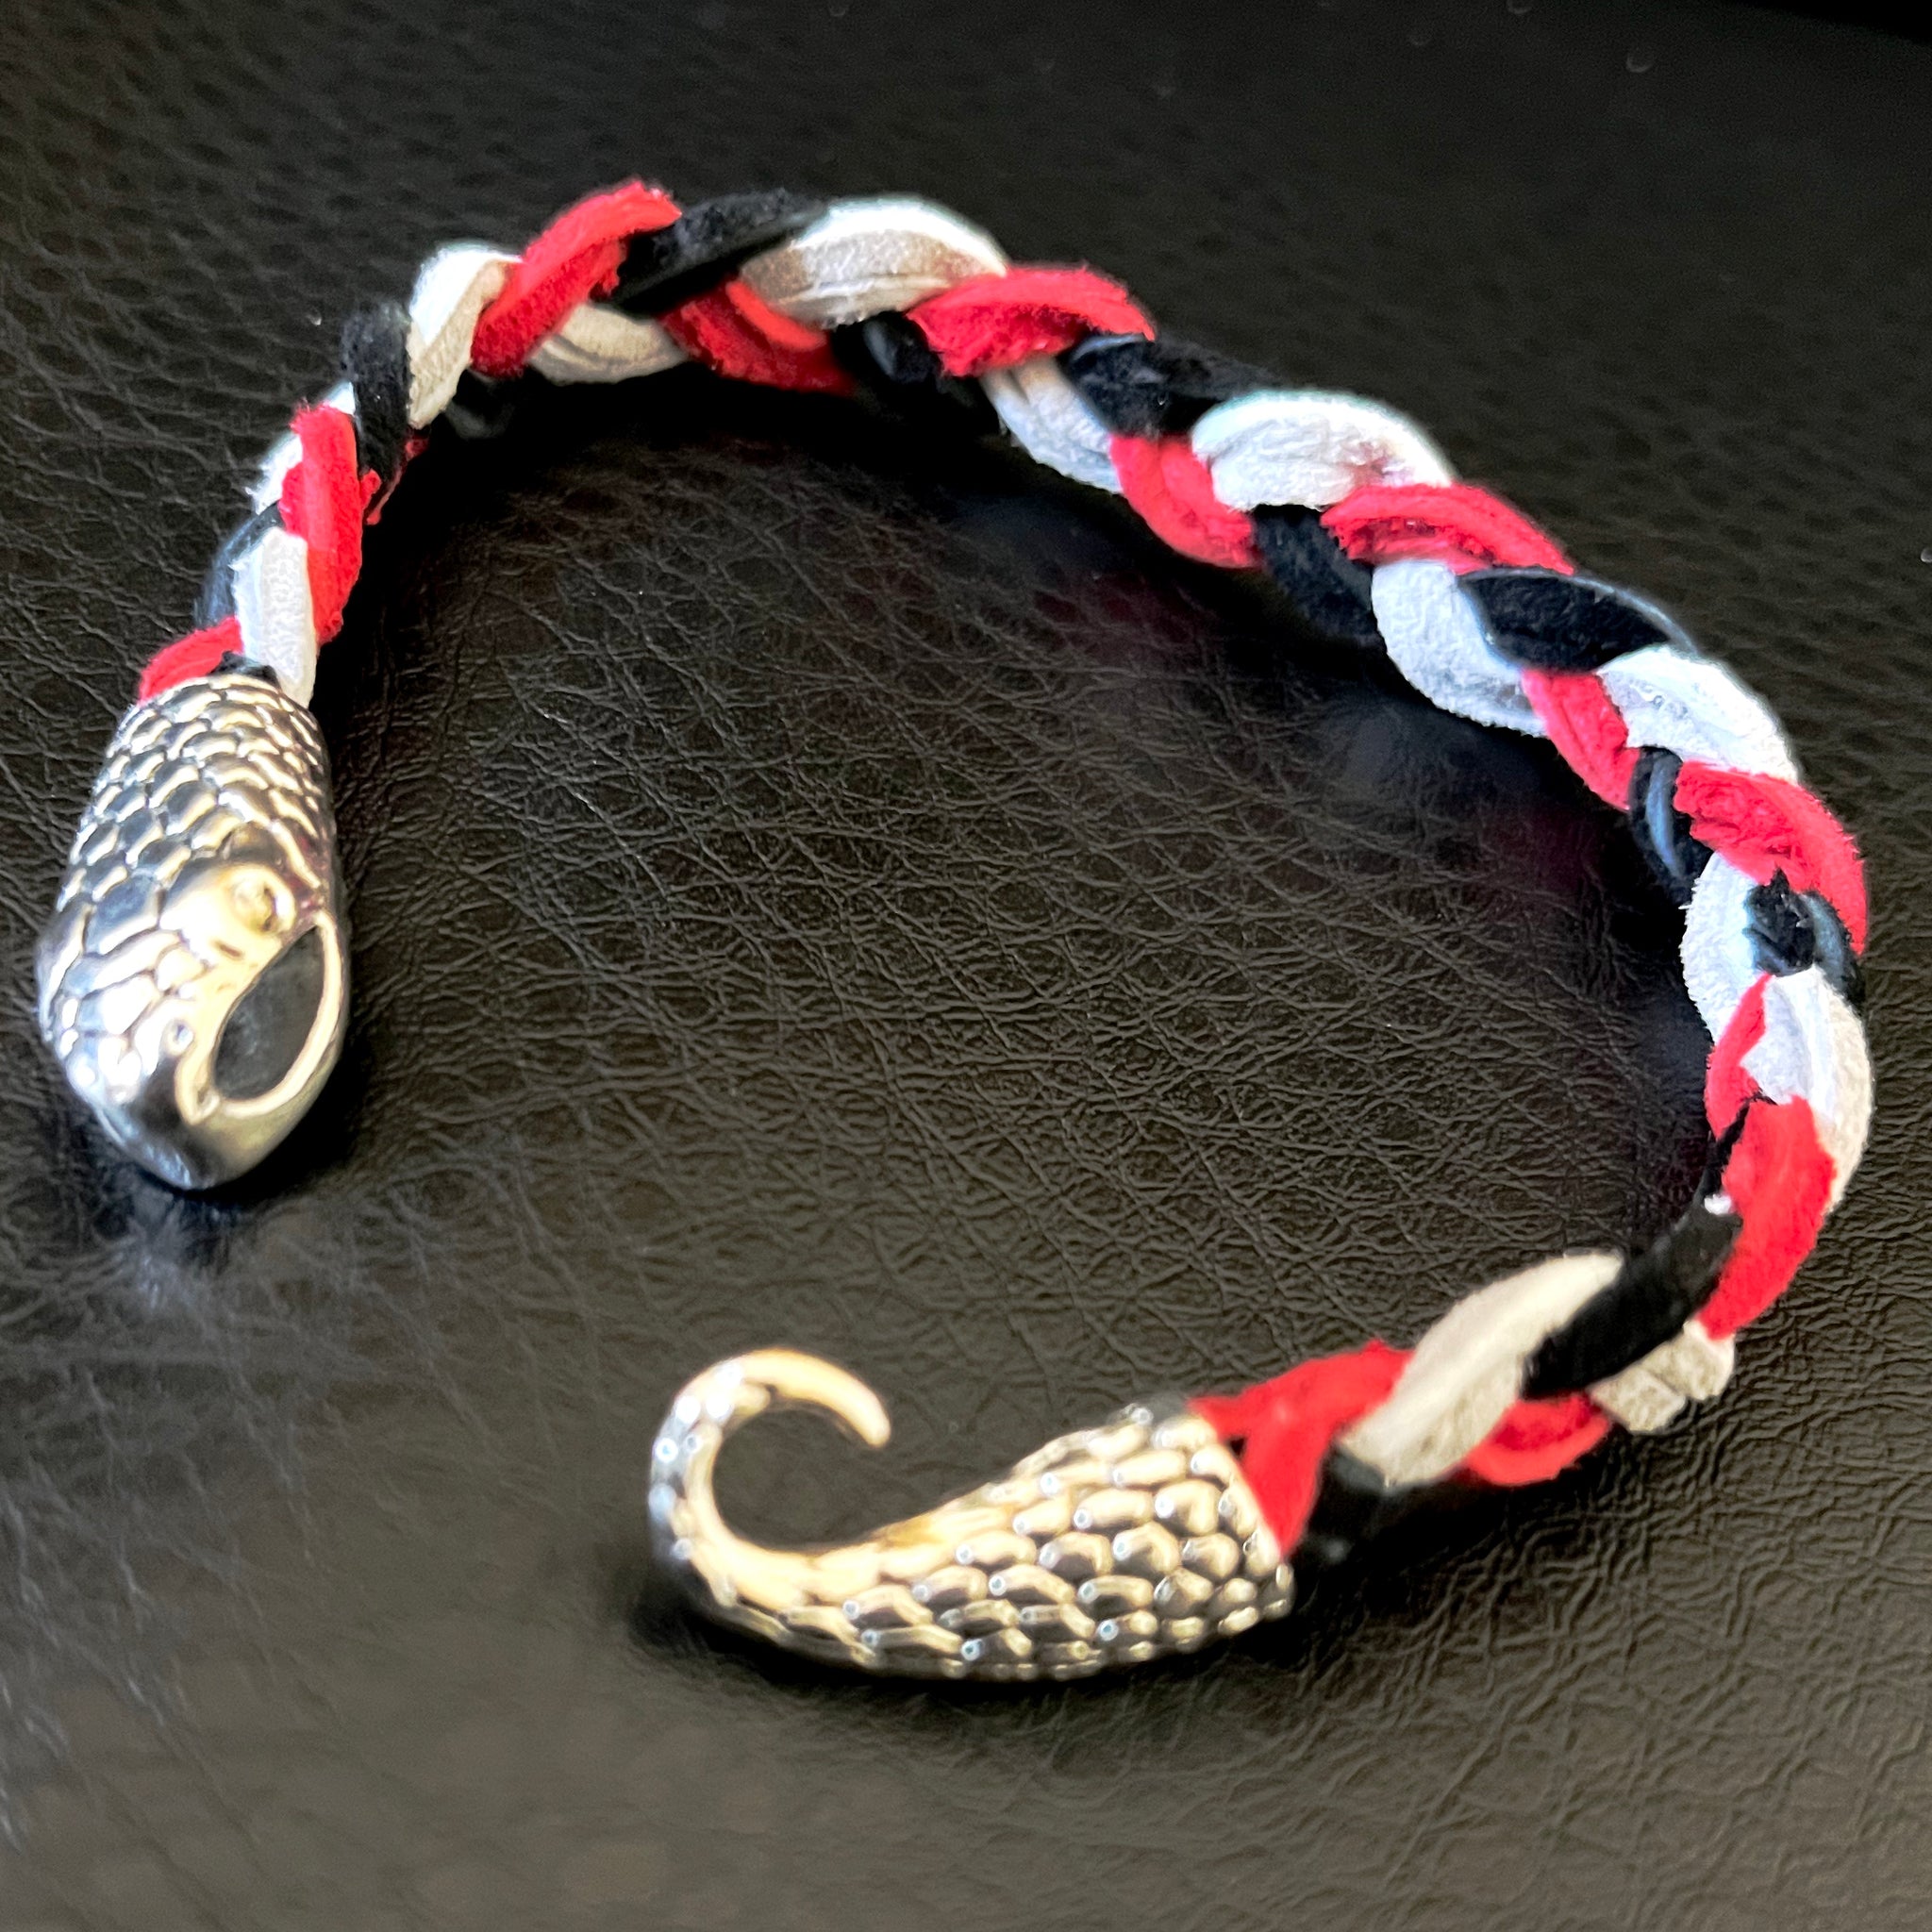 Bracelet made with grey, black, and red braided suede cord with silver tone snake clasp. 